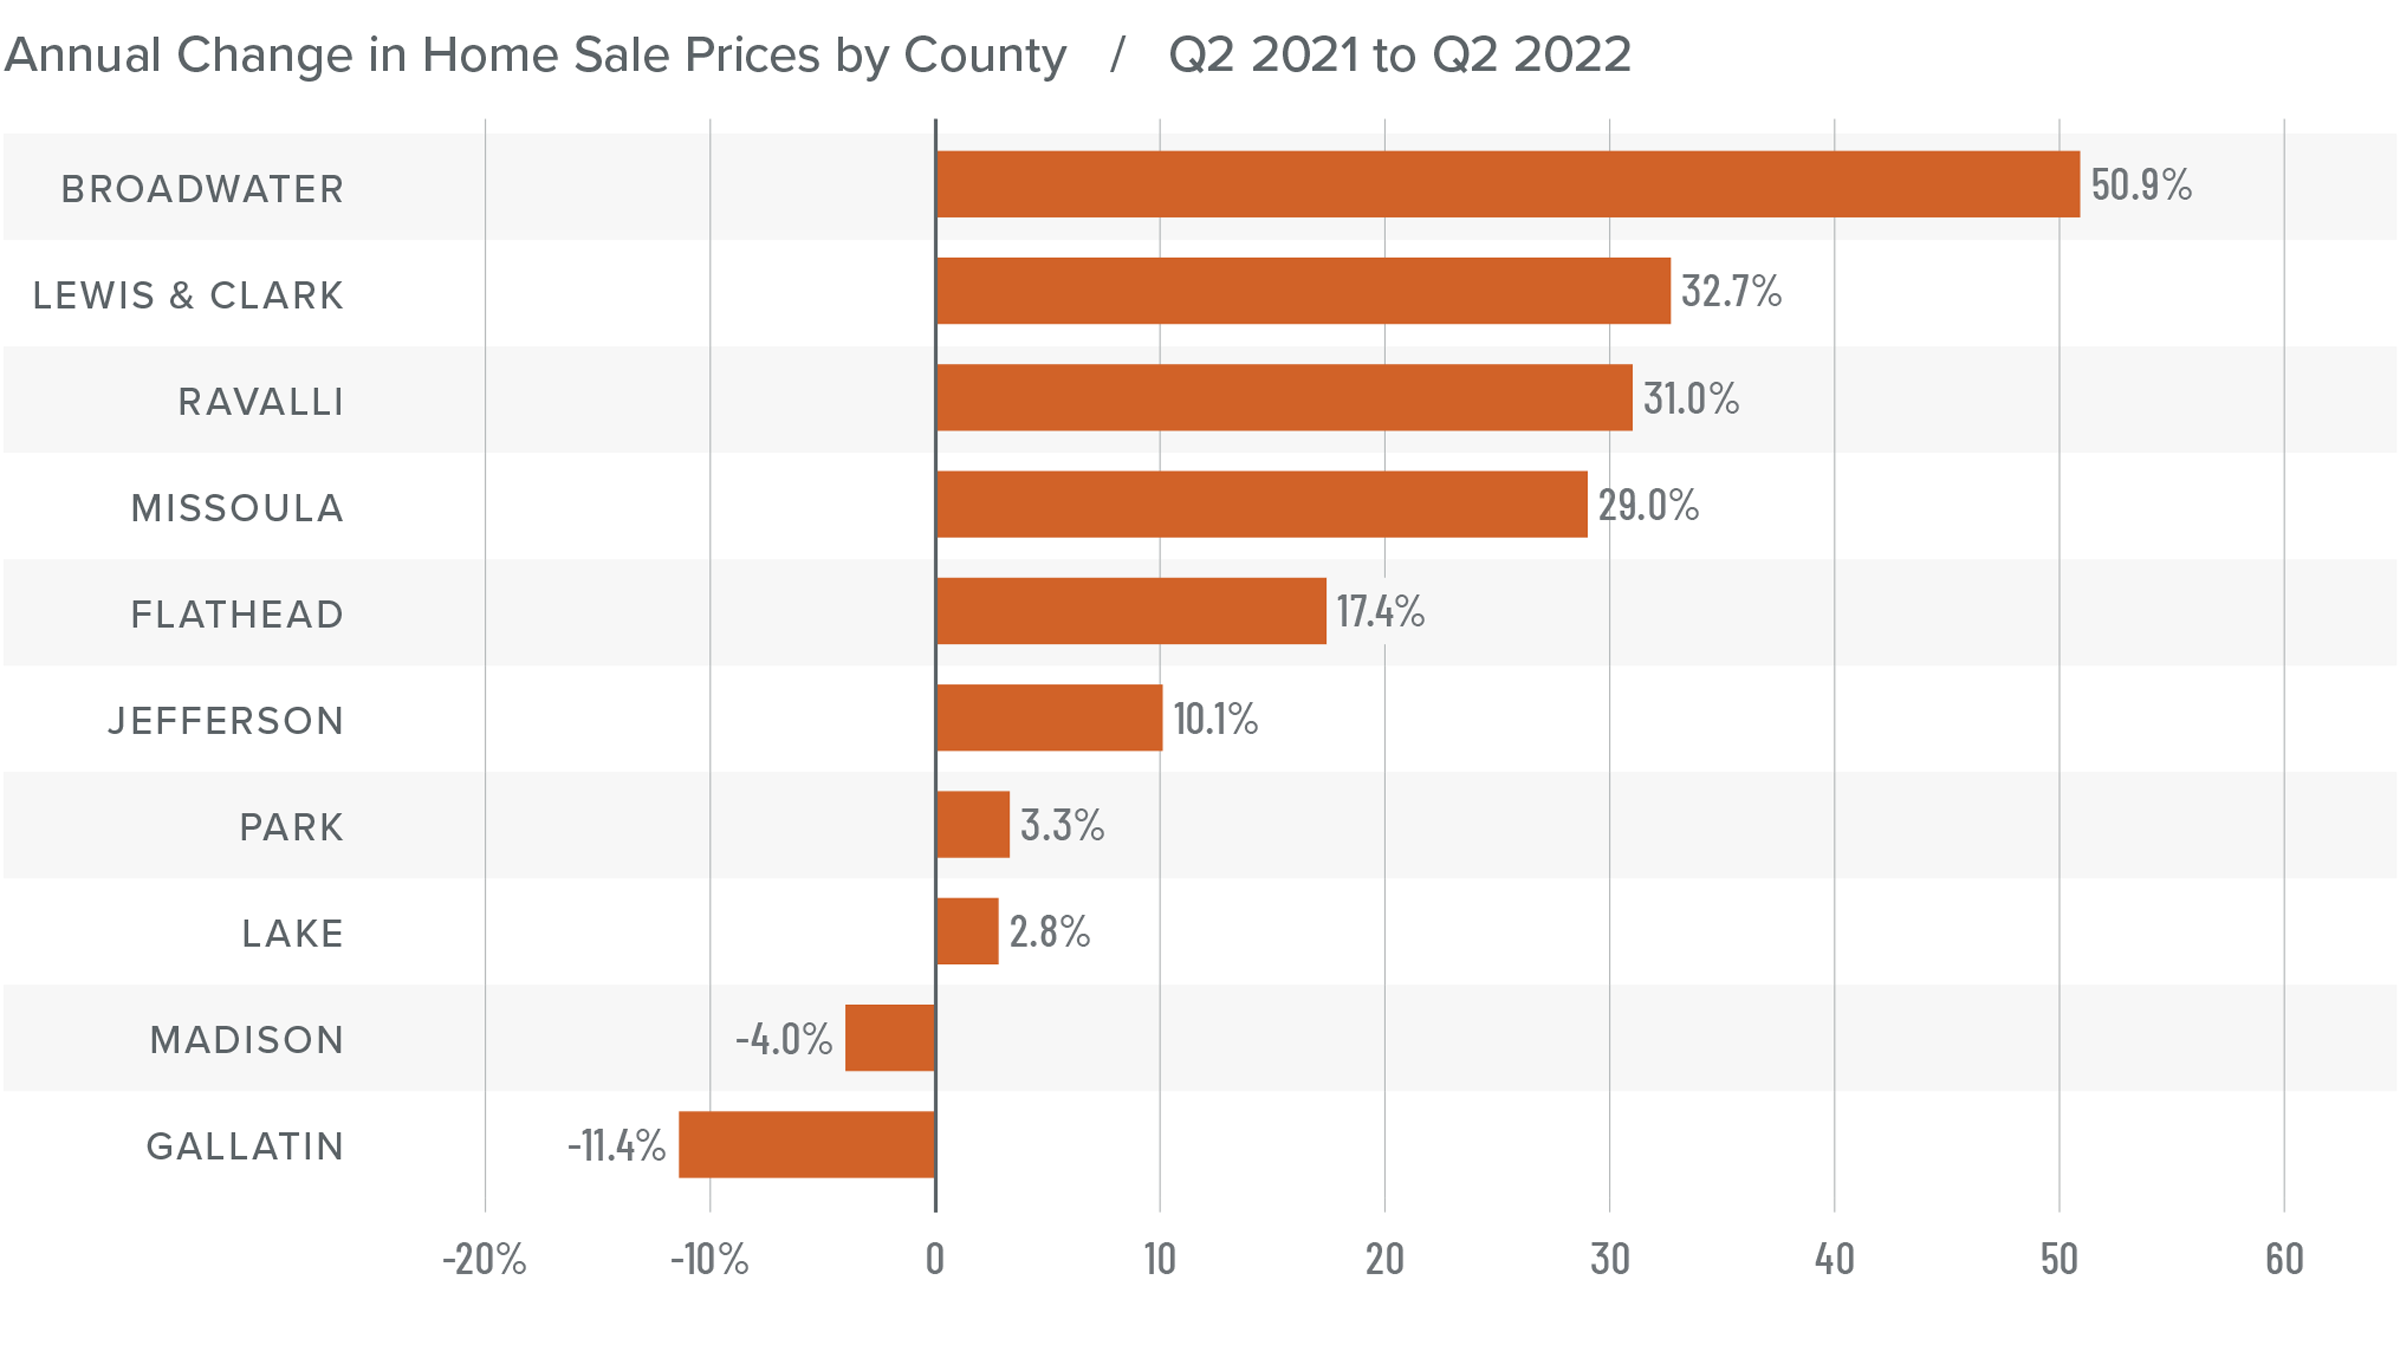 A bar graph showing the annual change in home sale prices for various counties in Montana from Q2 2021 to Q2 2022. Broadwater County tops the list at 50.9%, followed by Lewis & Clark at 32.7%, Ravalli at 31%, Missoula at 29%, Flathead at 17.4%, Jefferson at 10.1%, Park at 3.3%, Lake at 2.8%, Madison at -4%, and Gallatin at -11.4%.